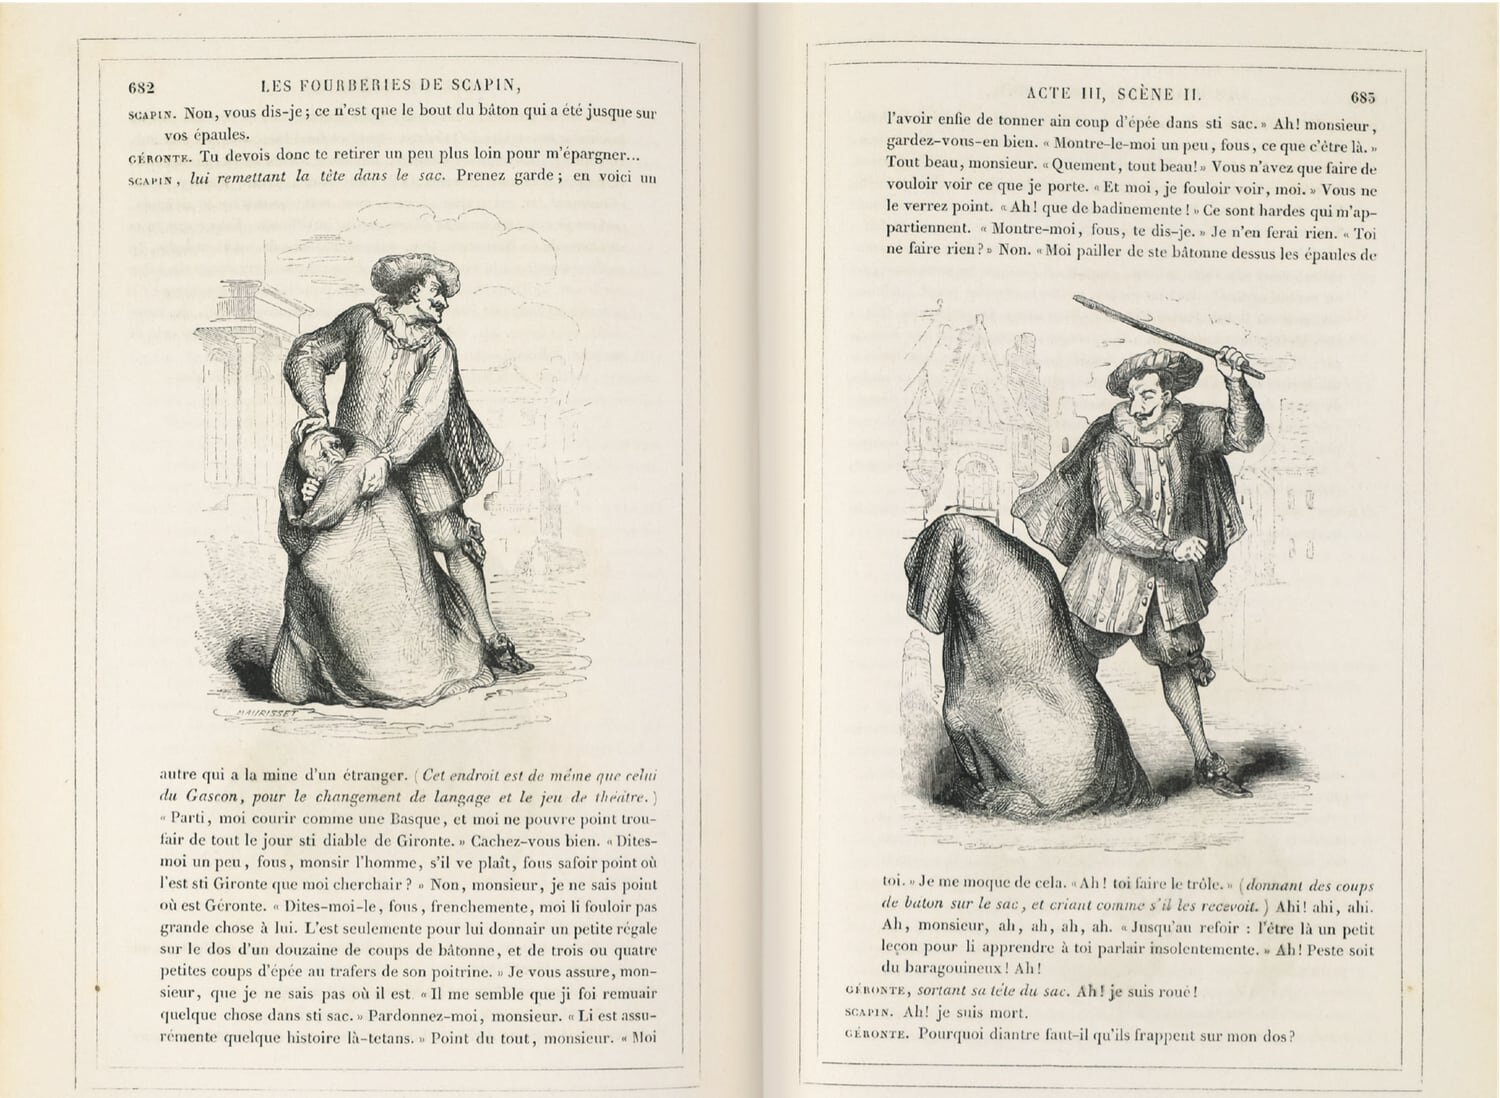  Some of Johannot’s illustrations for the collected works of Molière 